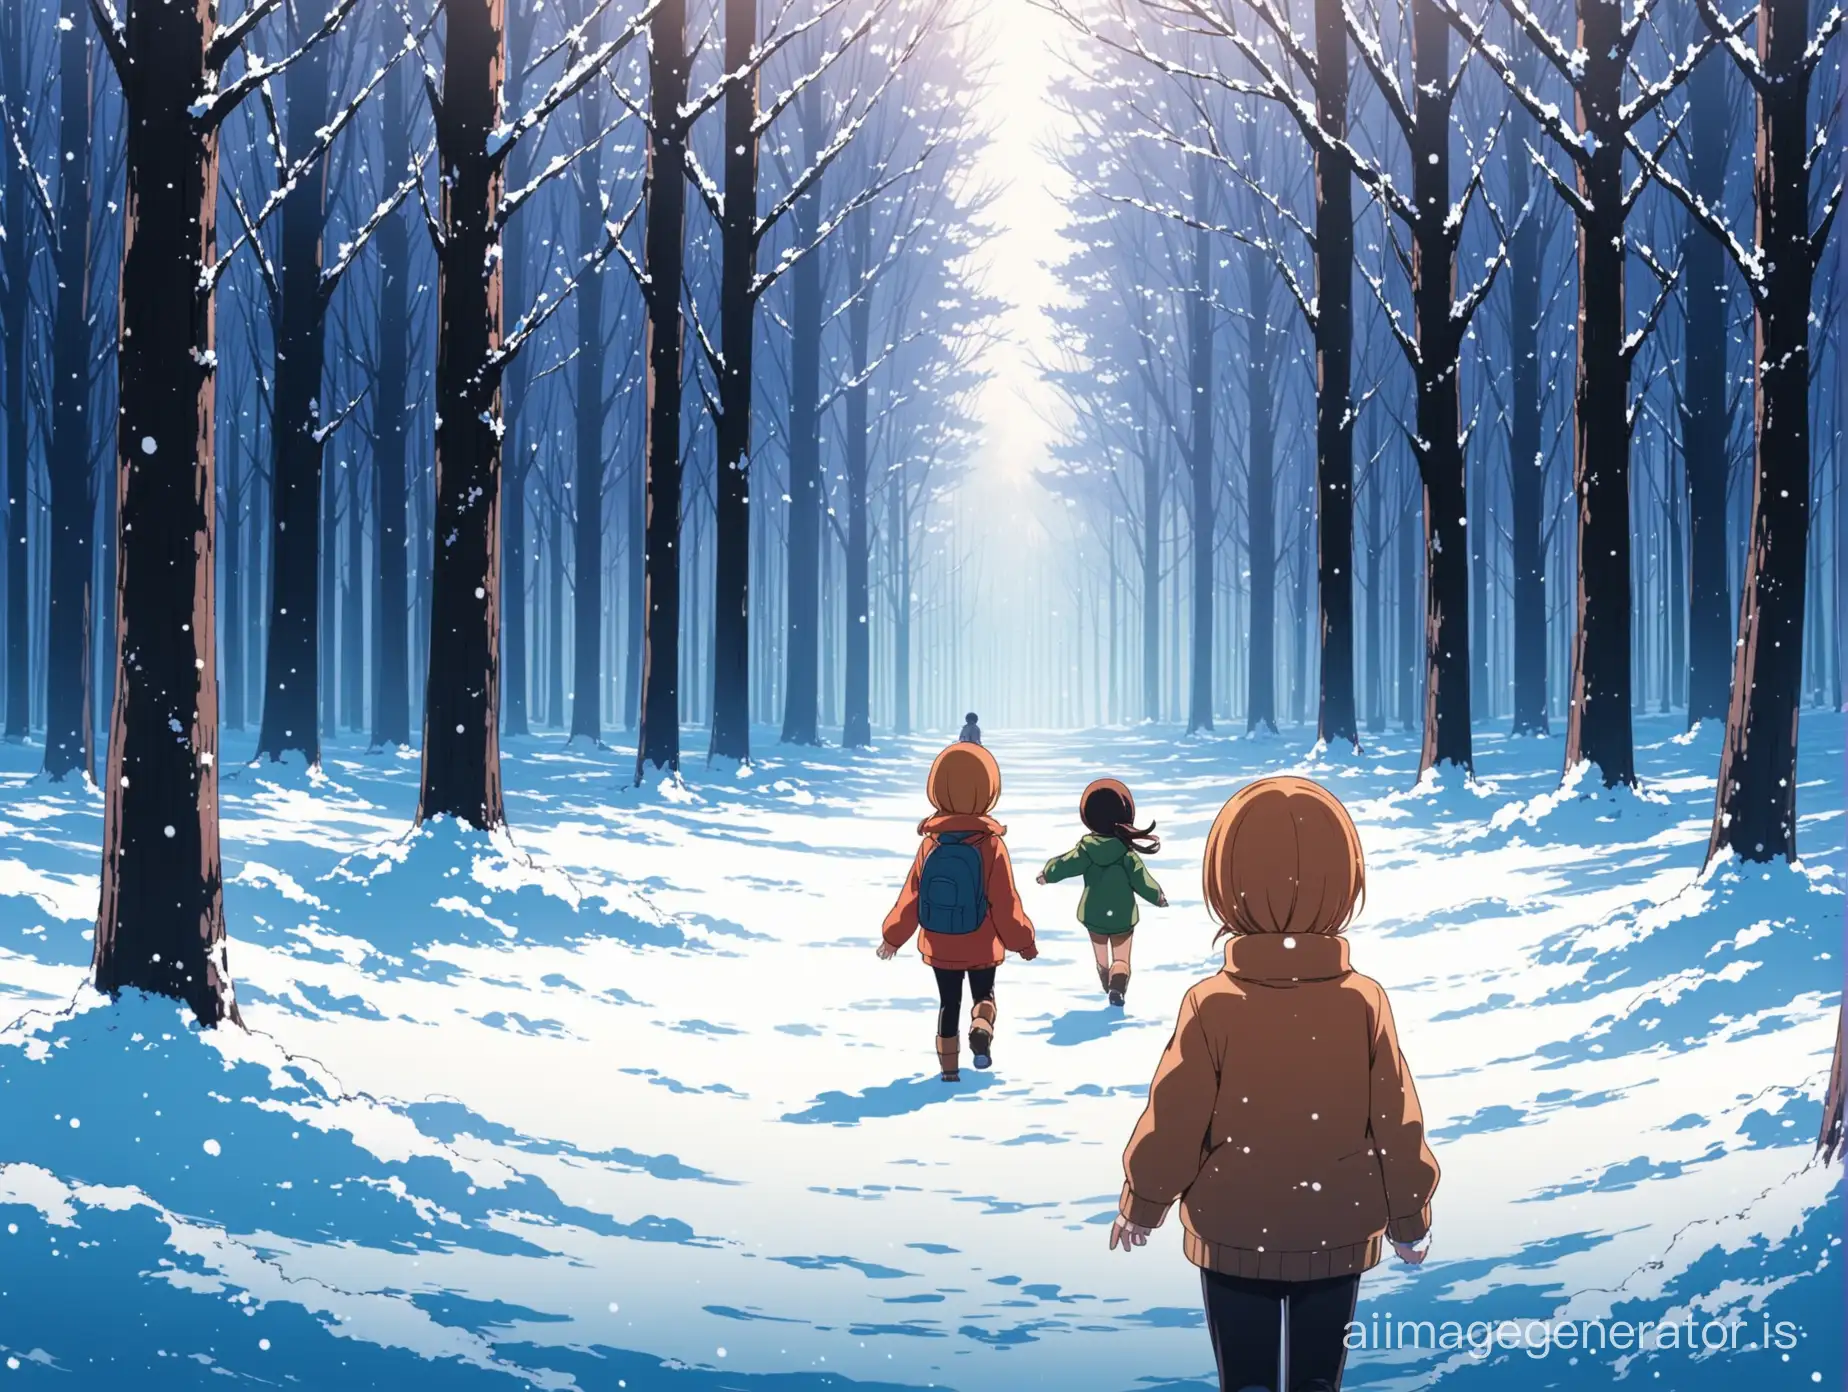 an anime image where there are 2 kids playing in the forest in the winter with their back to the camera